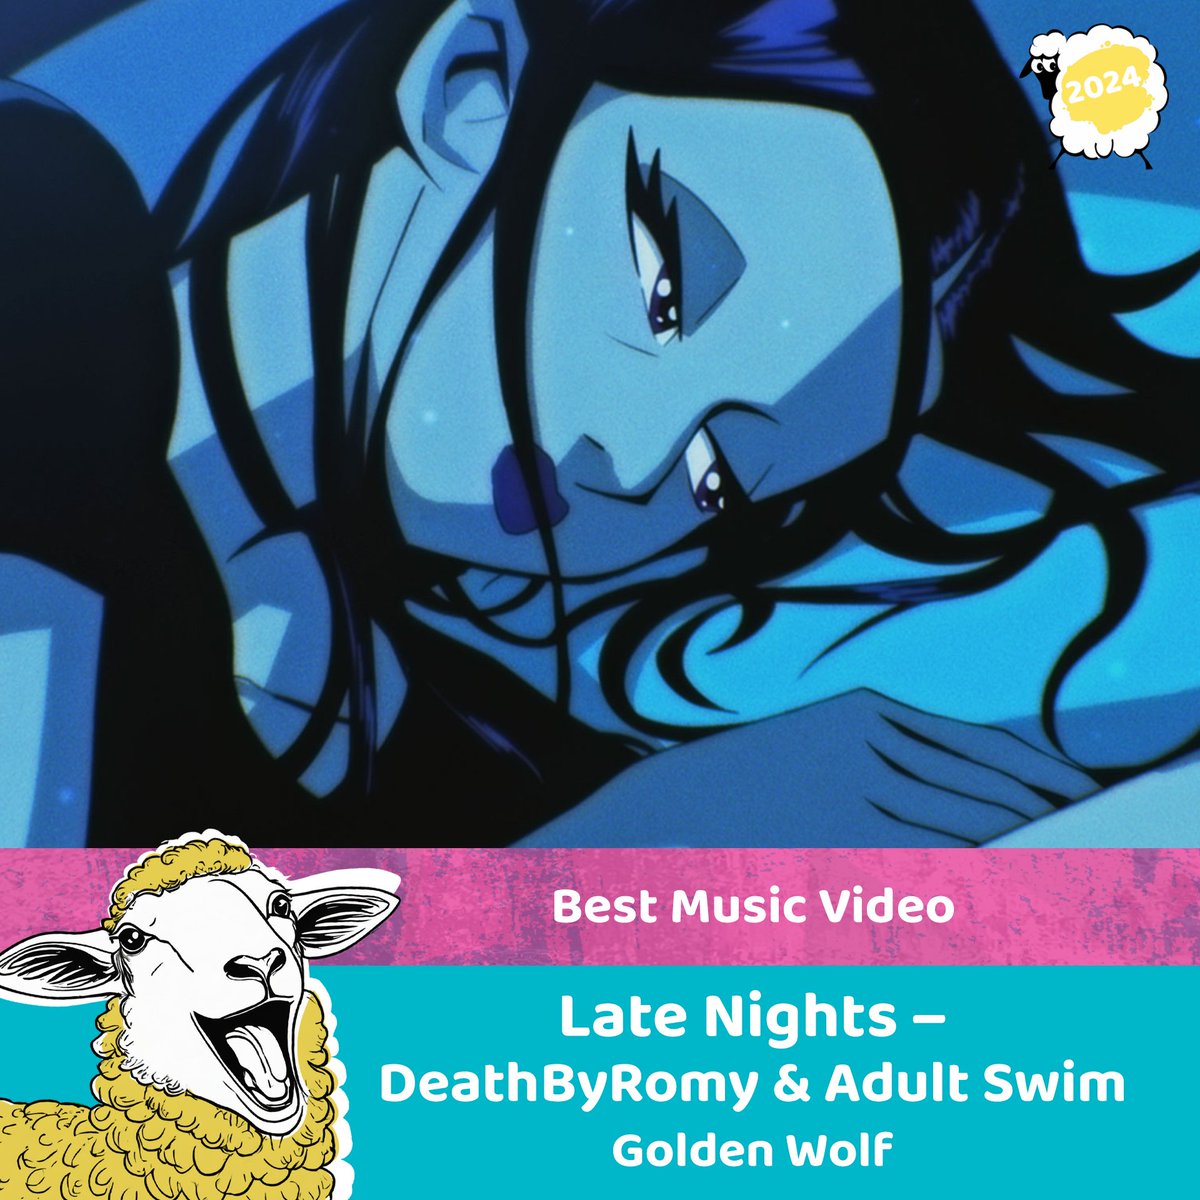 Well done Late Nights – DeathByRomy & Adult Swim for being awarded Best Music Video! #BAA24